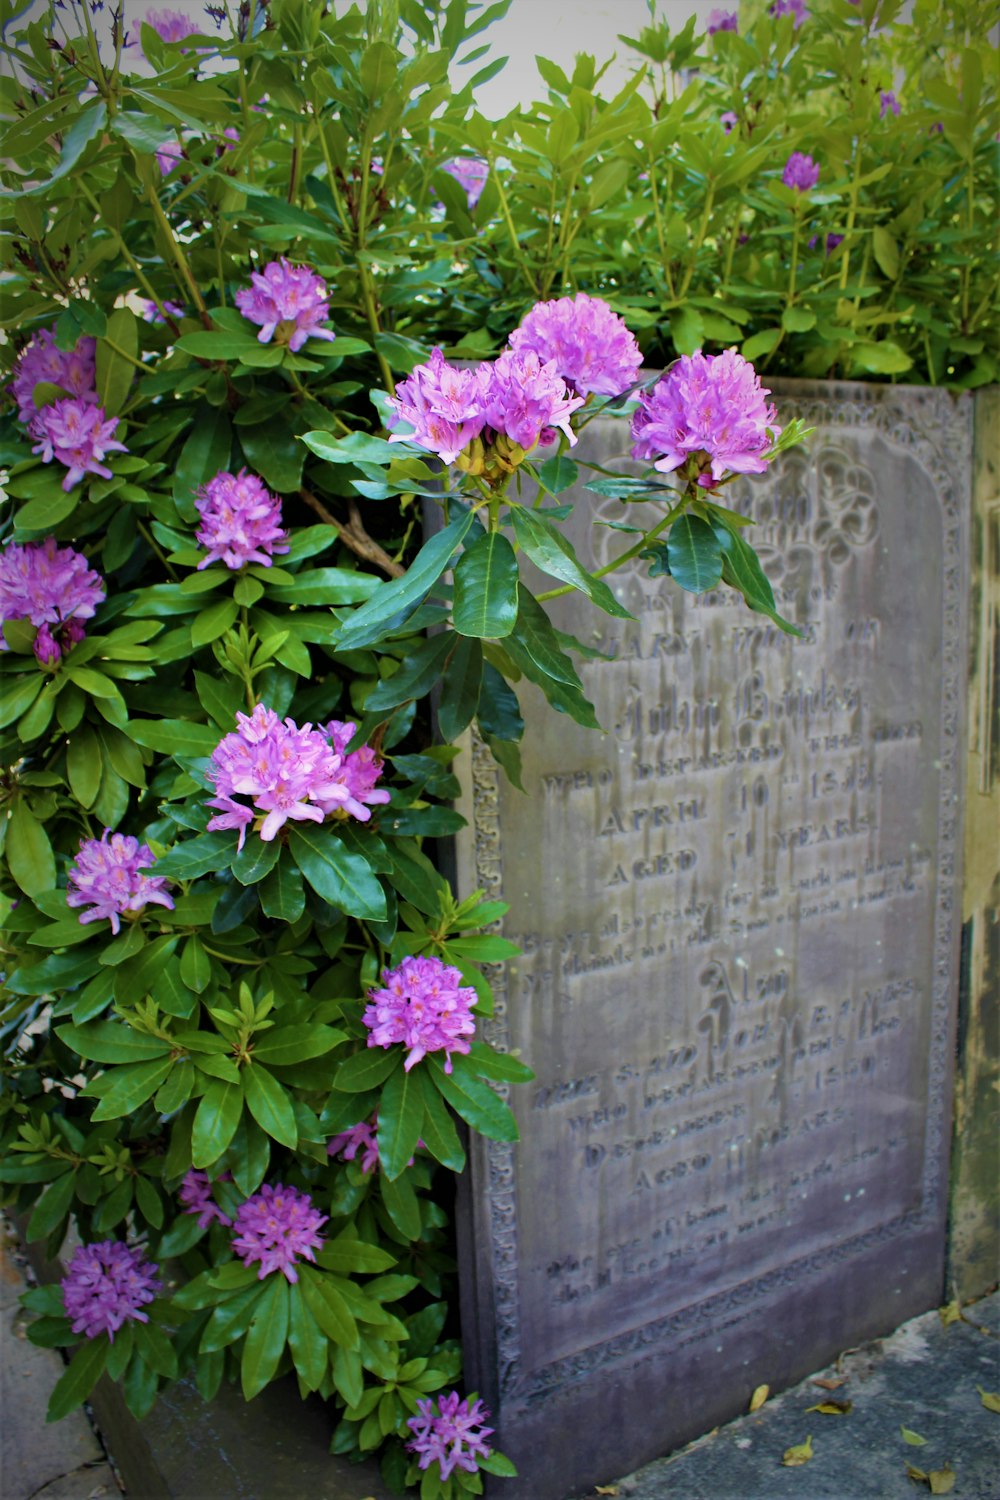 a tombstone with flowers on it